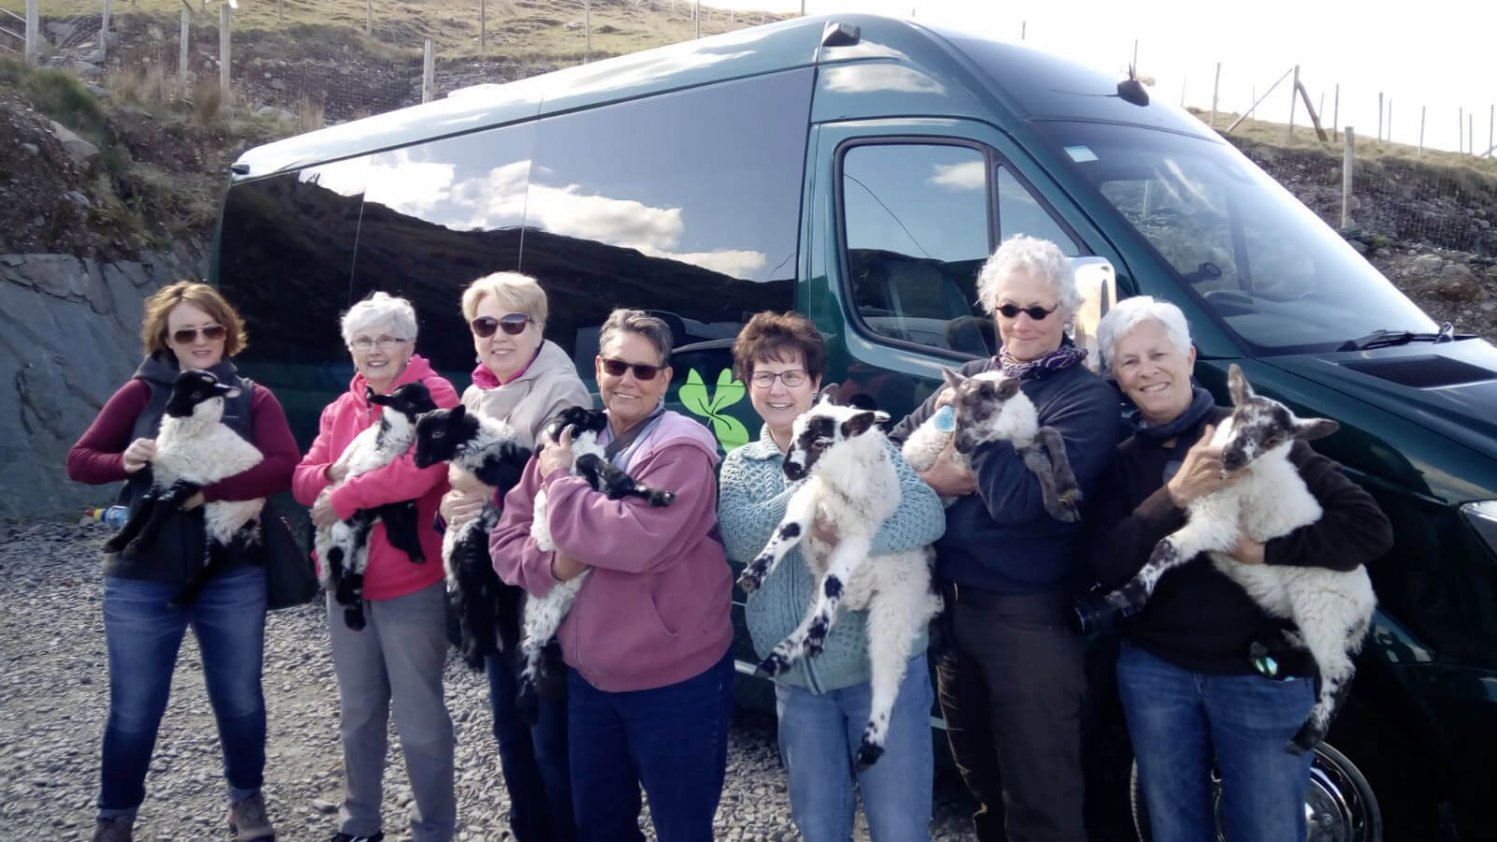 Group of Driftwood tour guests pose holding a baby lamb each